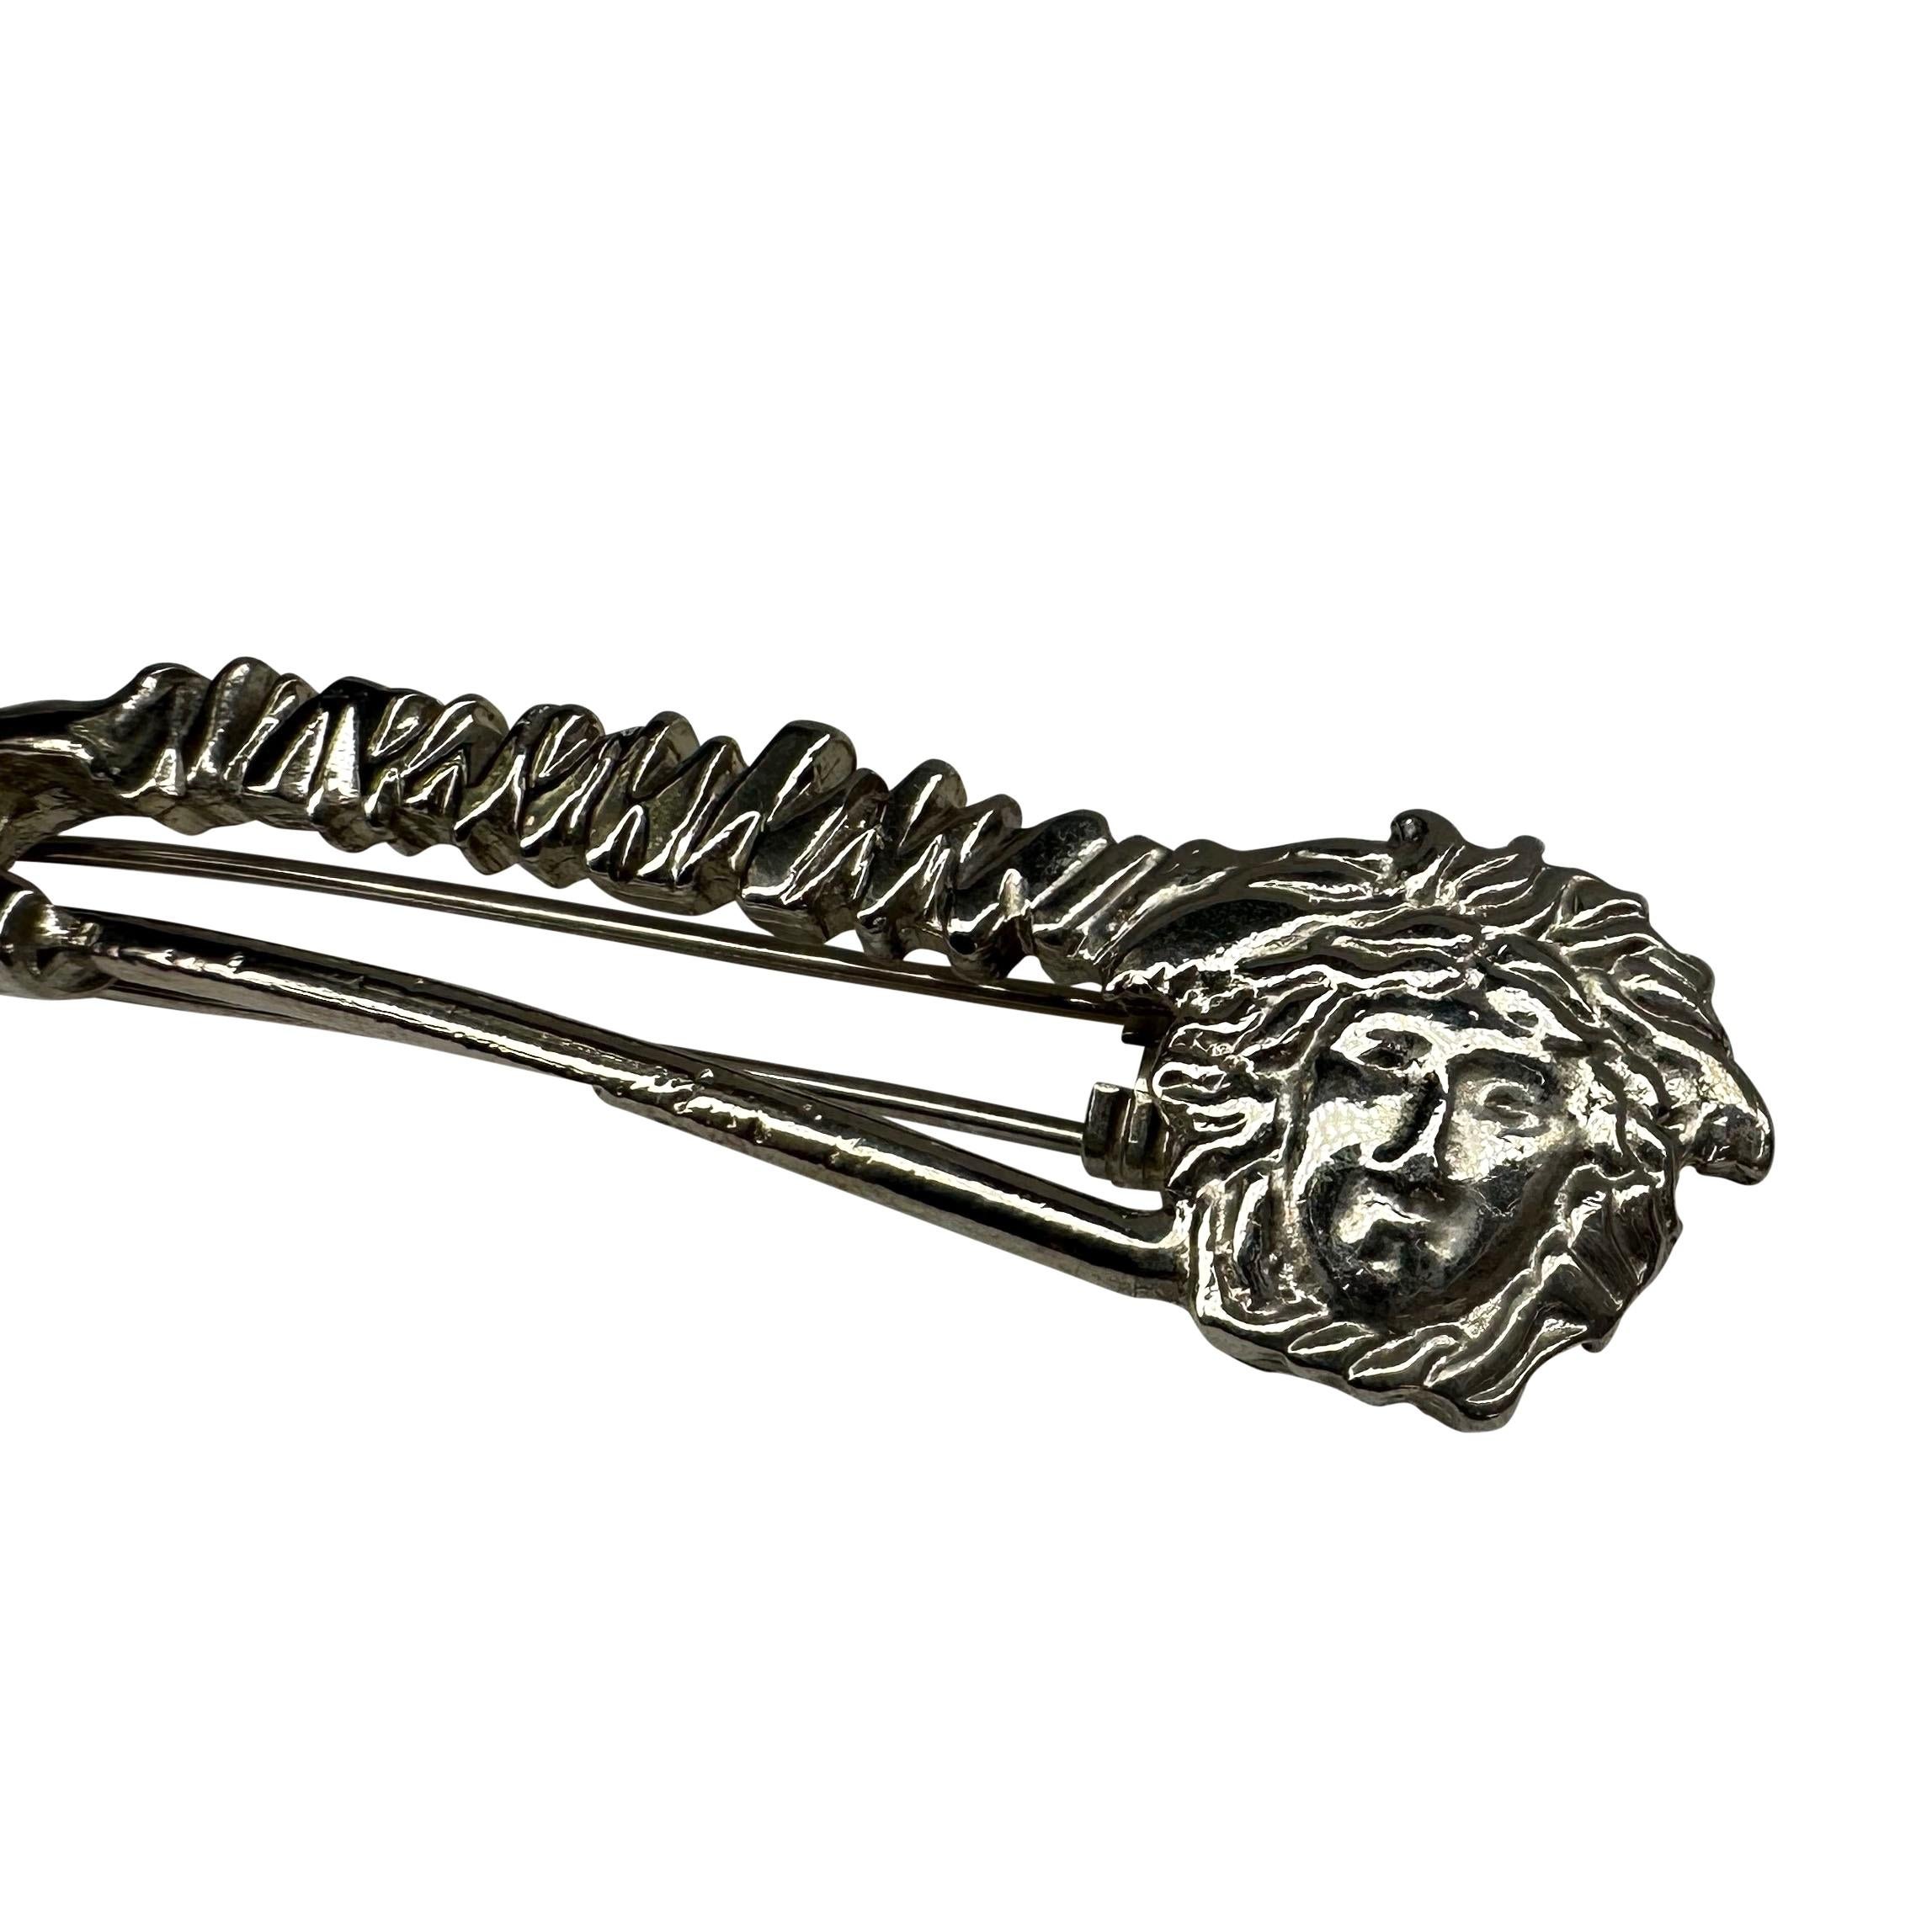 Presenting an incredible silver-tone Gianni Versace Medusa hair clip, designed by Gianni Versace. From the Spring/Summer 1994 collection, this oversized safety pin barrette features a Versace Medusa logo. One of Gianni Versace's most iconic house